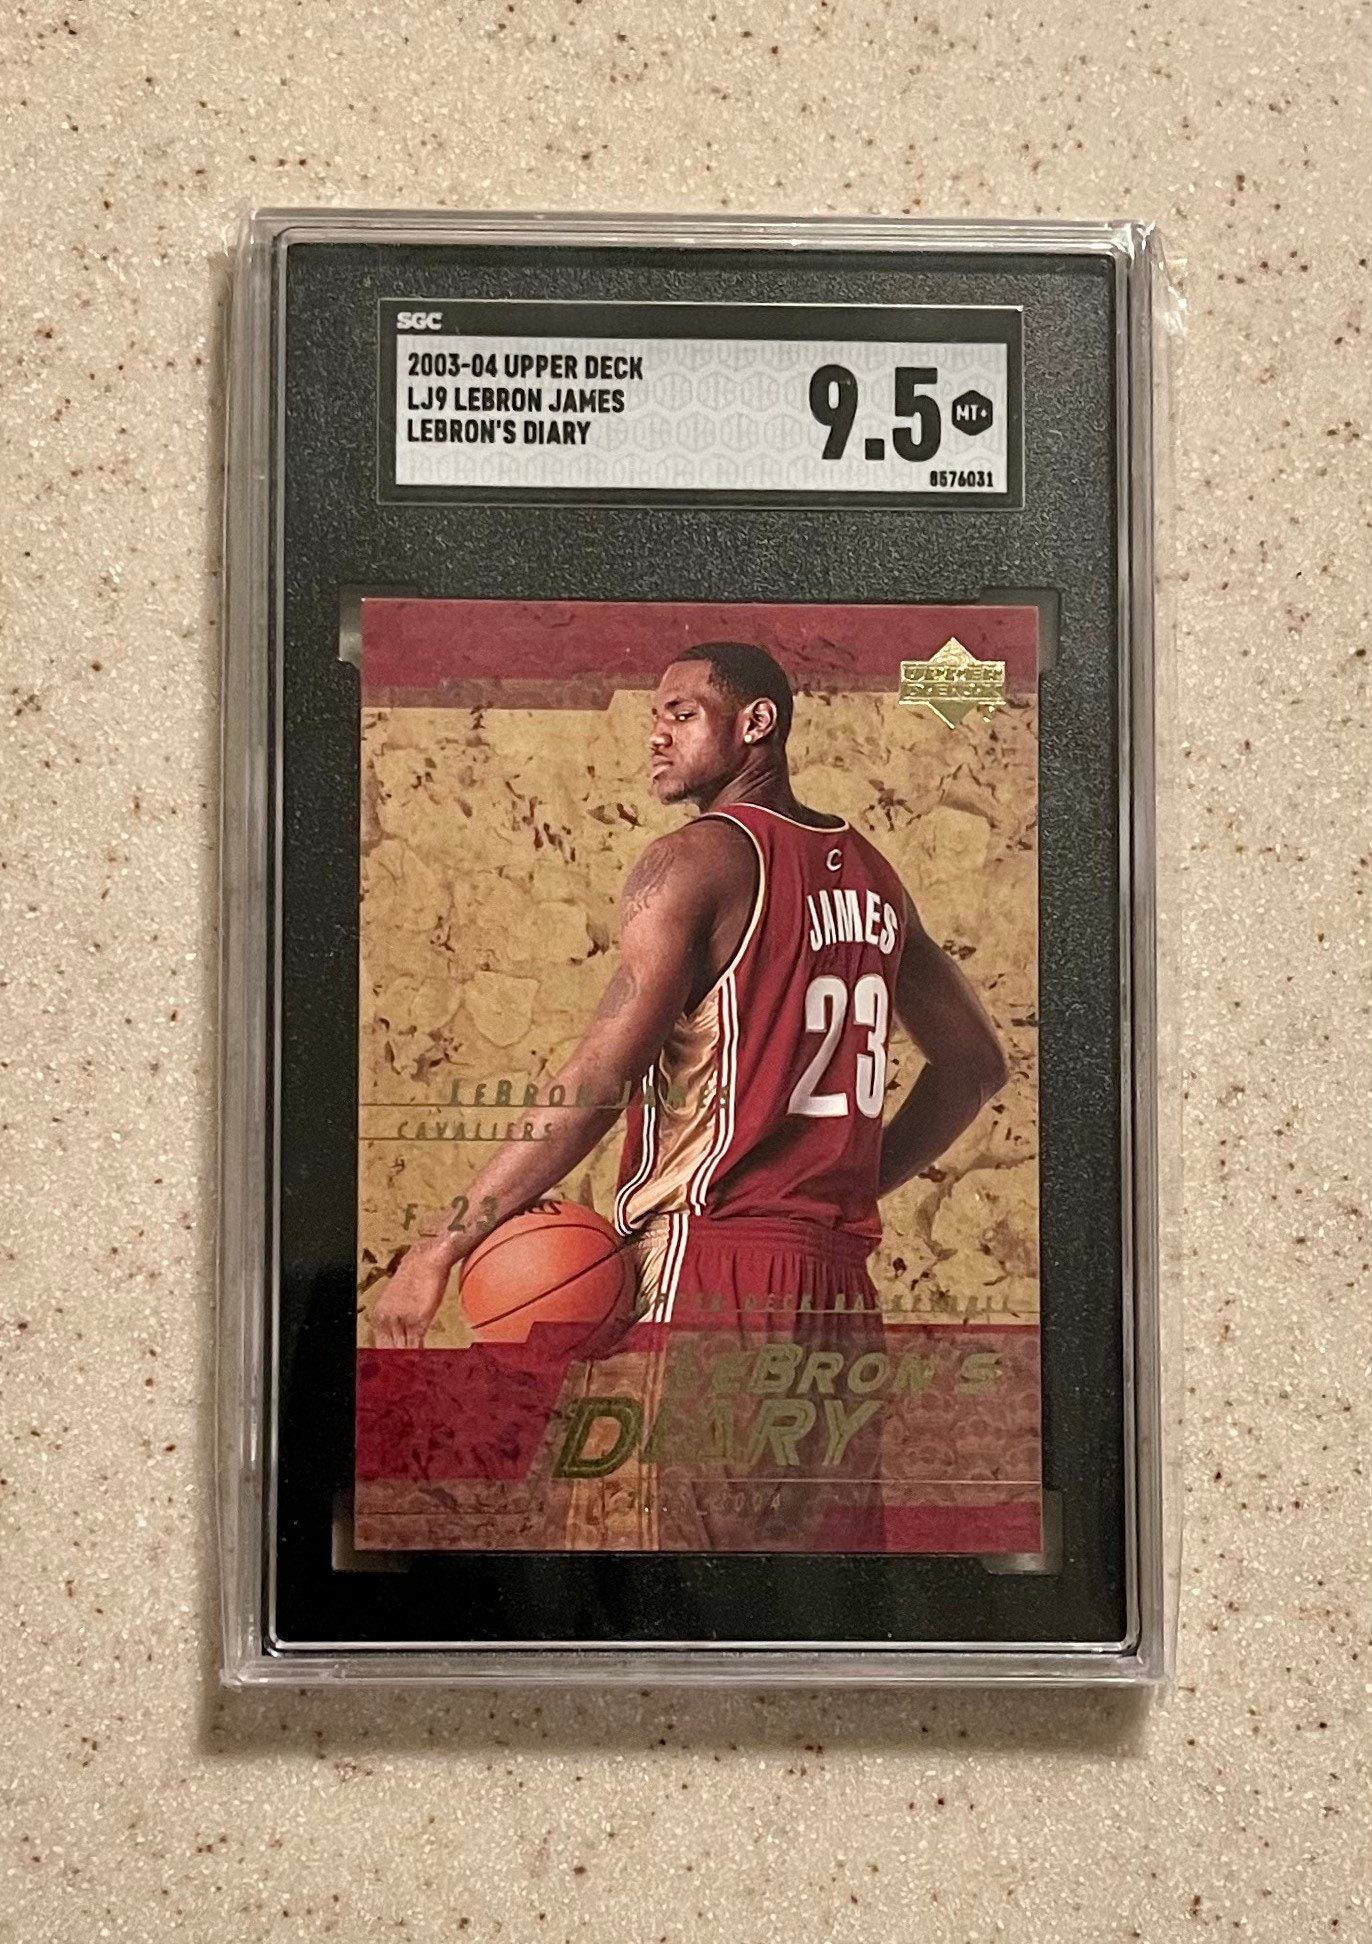 lebron james rookie card - Sports Trading Cards